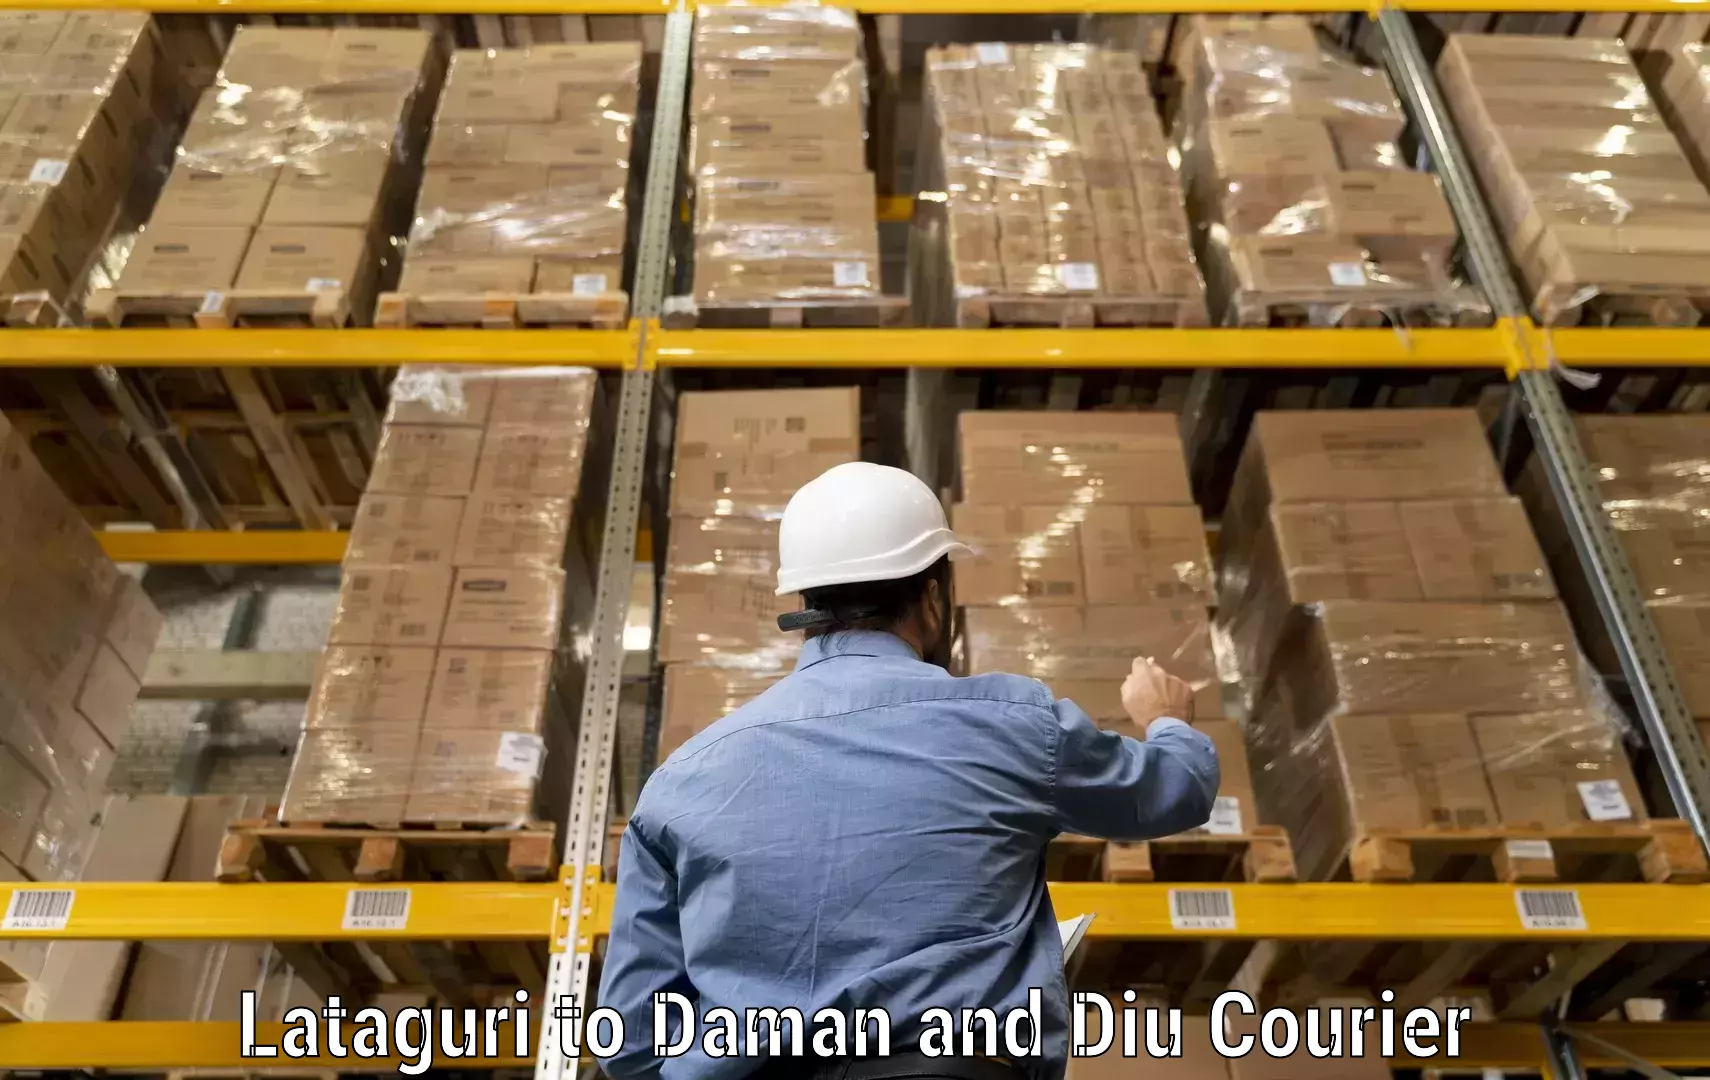 Courier rate comparison Lataguri to Daman and Diu